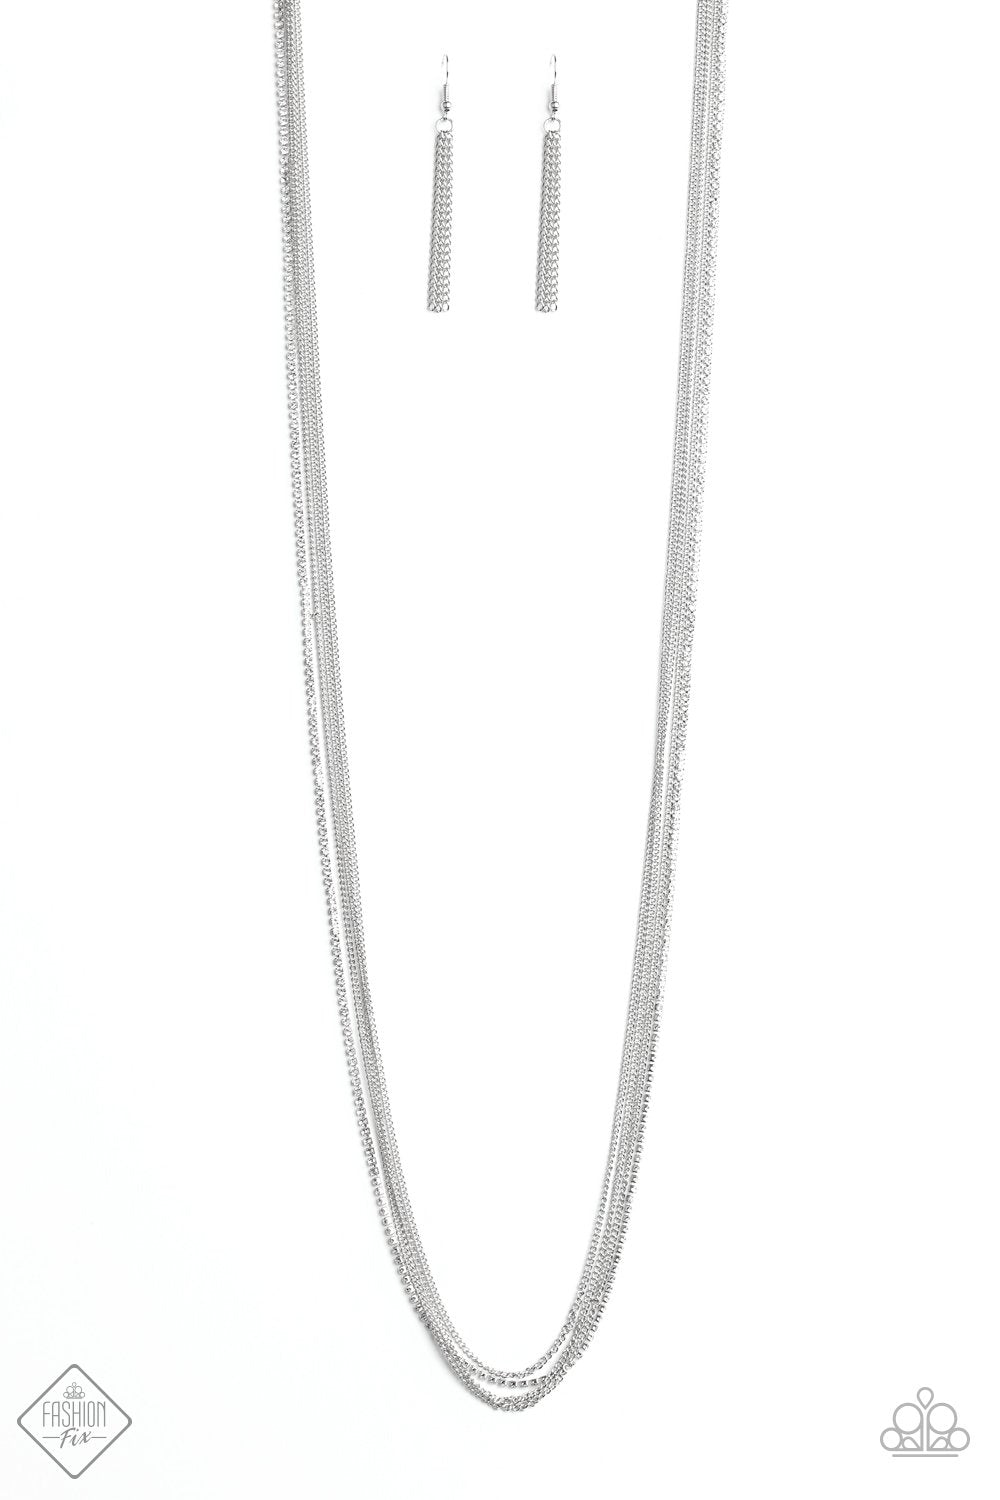 SLEEK and Destroy Silver Chain and White Rhinestone Necklace - Paparazzi Accessories-CarasShop.com - $5 Jewelry by Cara Jewels